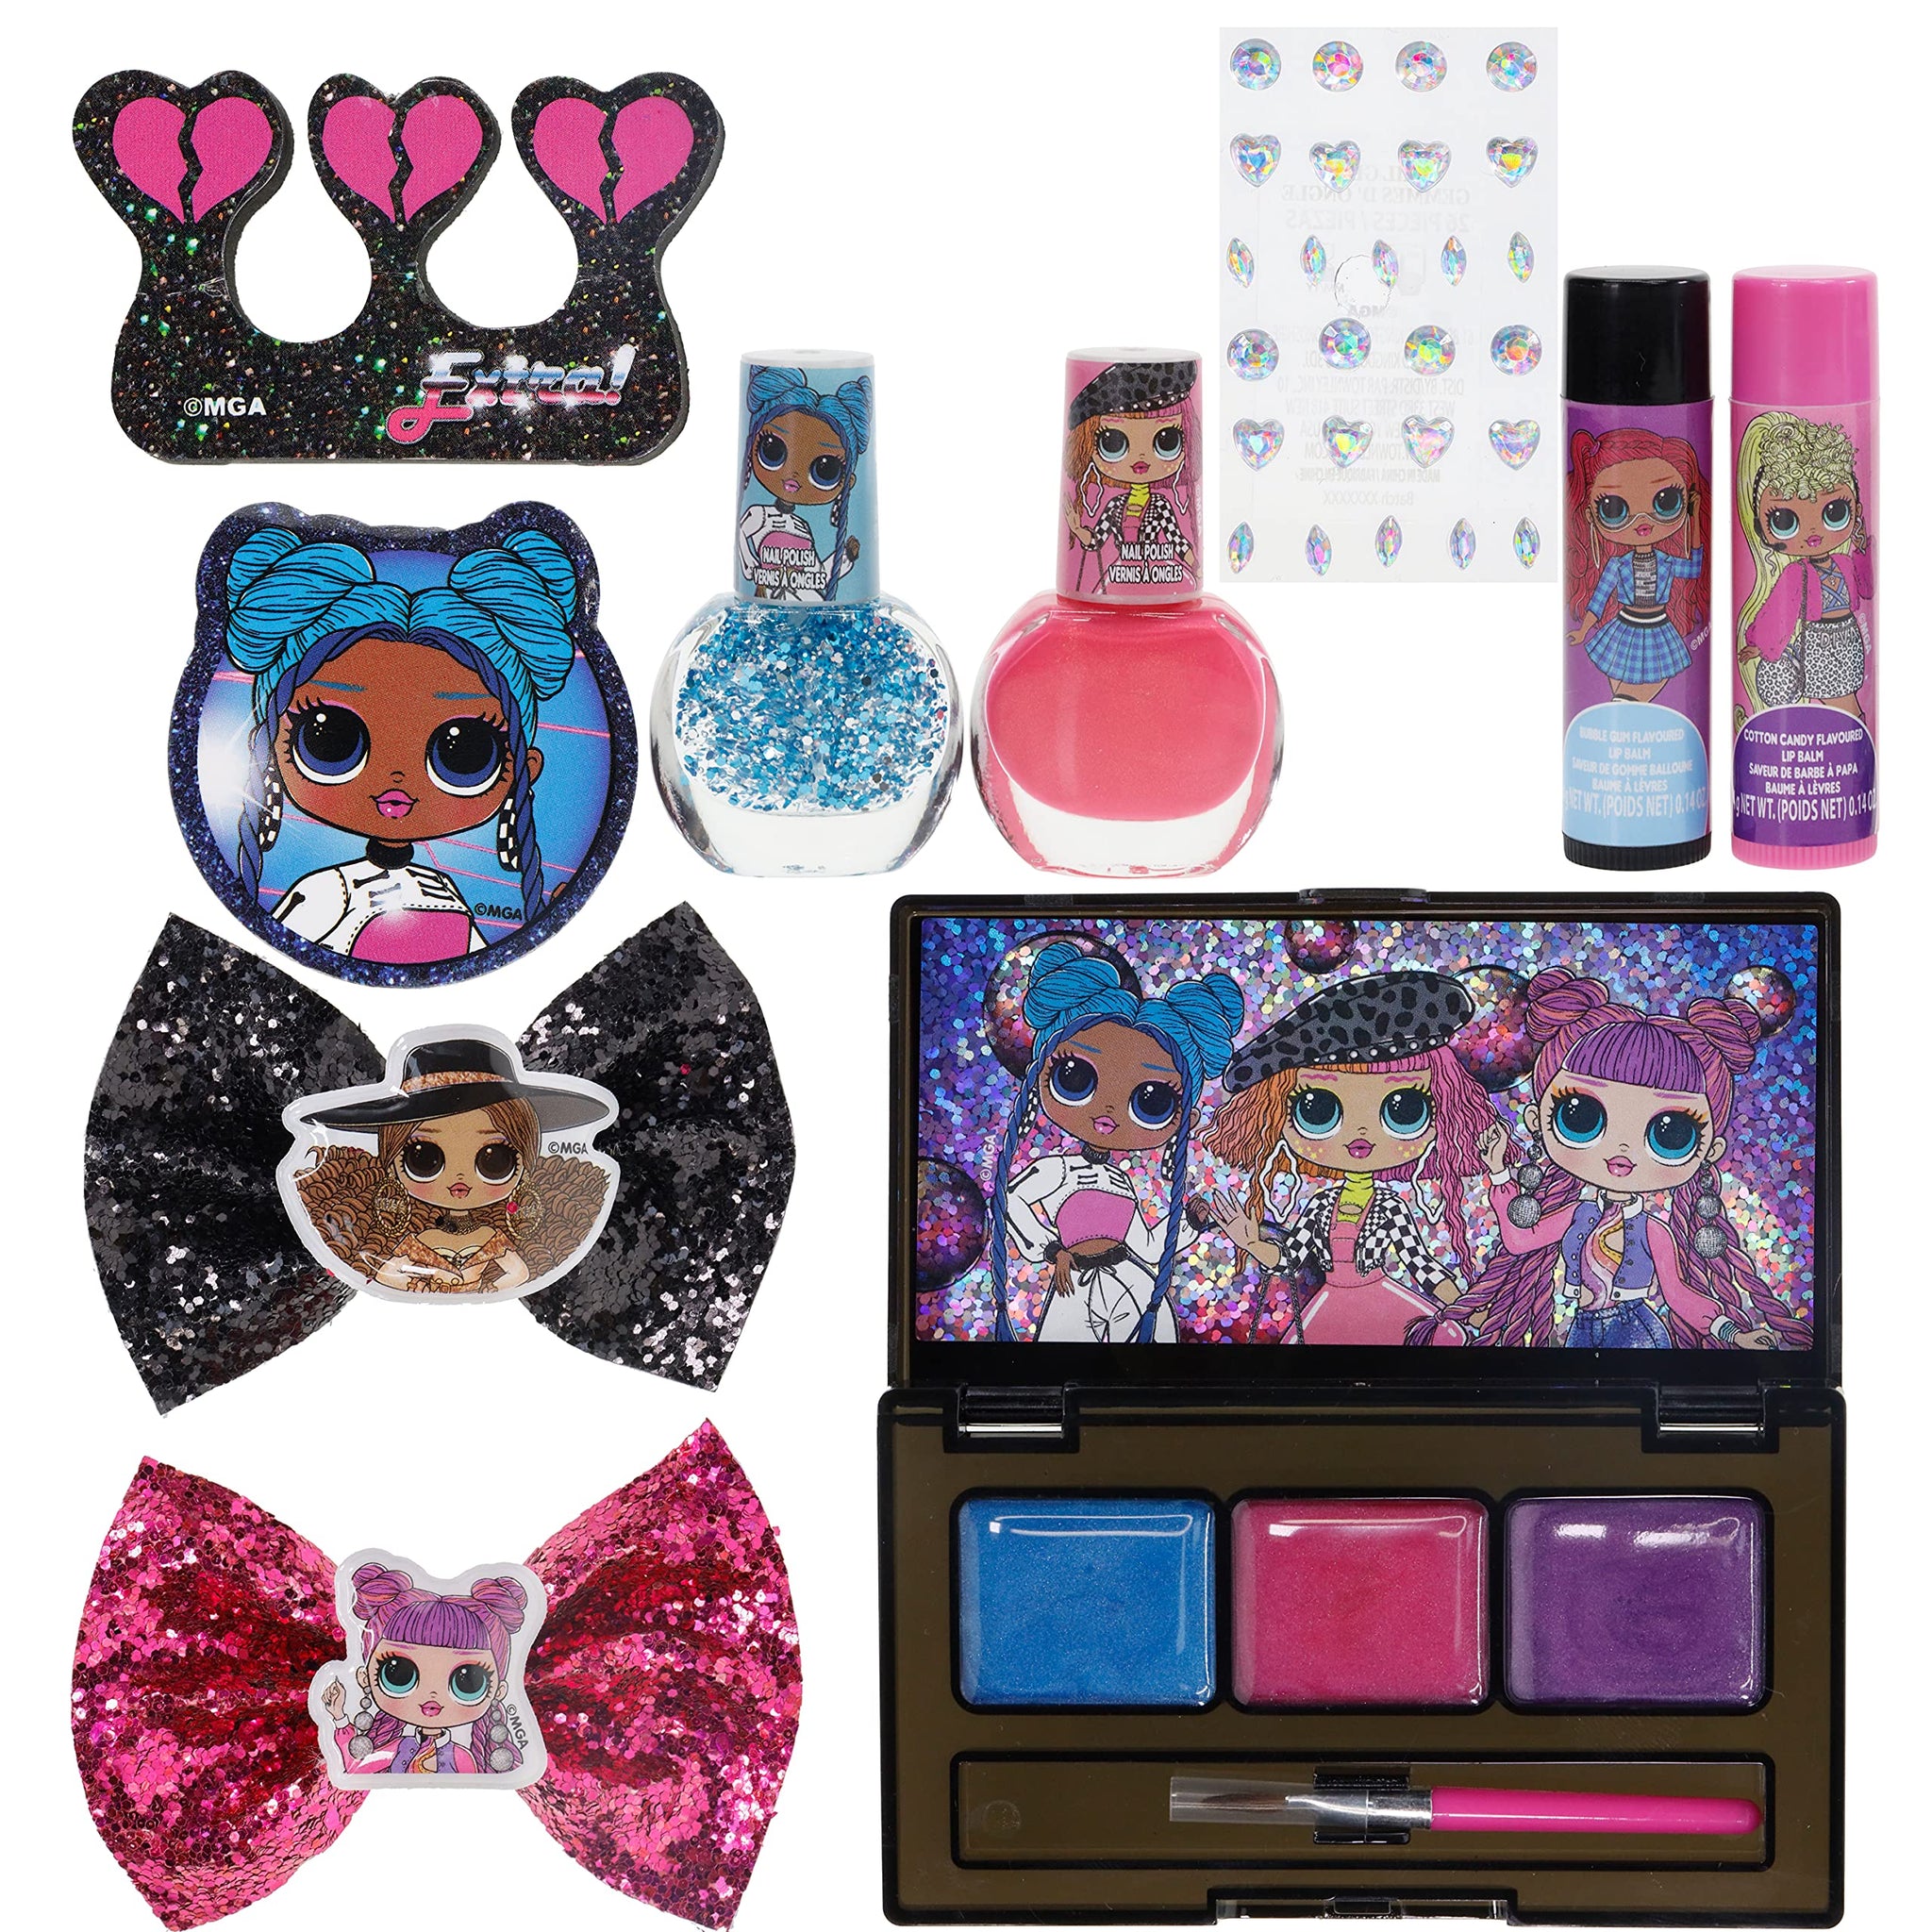 Townley Girl LOL Surprise! Fashion Purse Makeup Set with Non-Toxic Nail  Polish, Eyeshadow, Hair Accessories and More, Rainbow Chain for Girls Ages  3